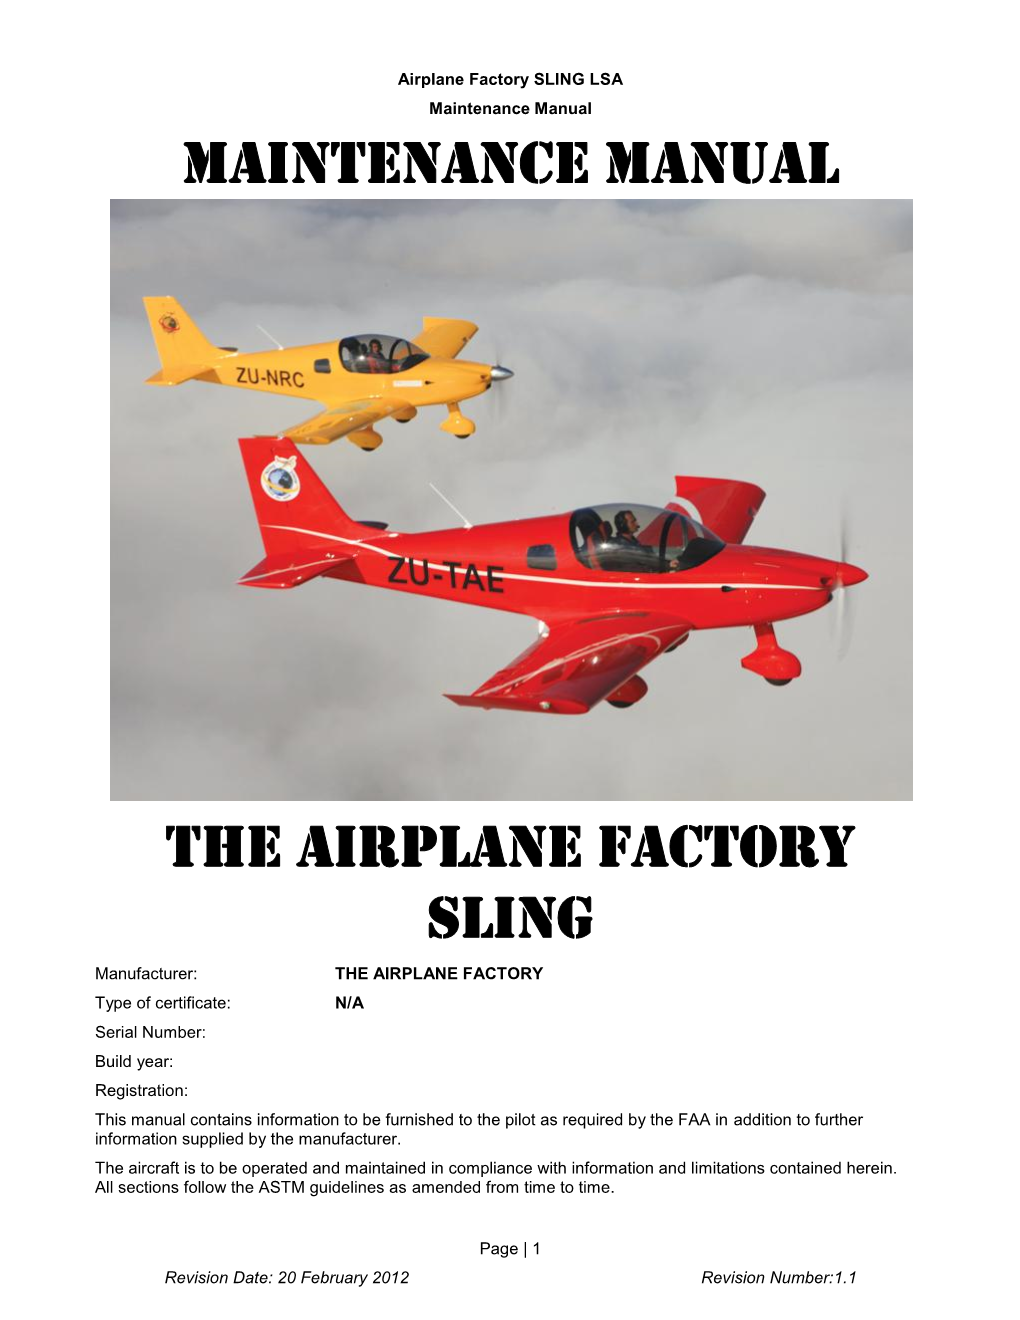 Maintenance Manual the Airplane Factory Sling